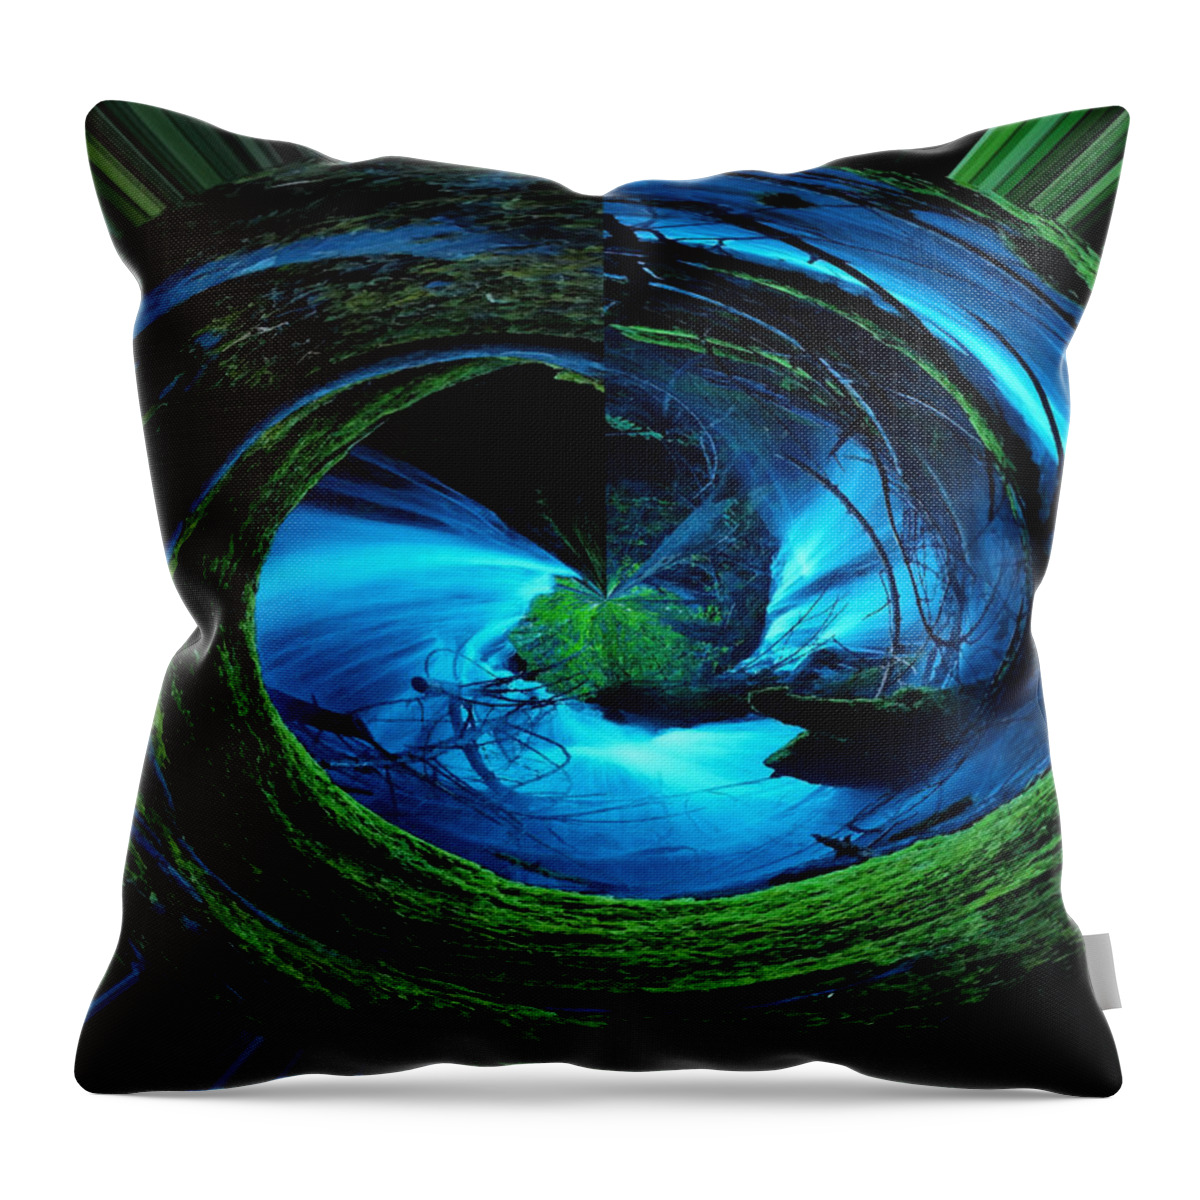 Green Throw Pillow featuring the digital art The Center Of My Waterfall by Teri Schuster